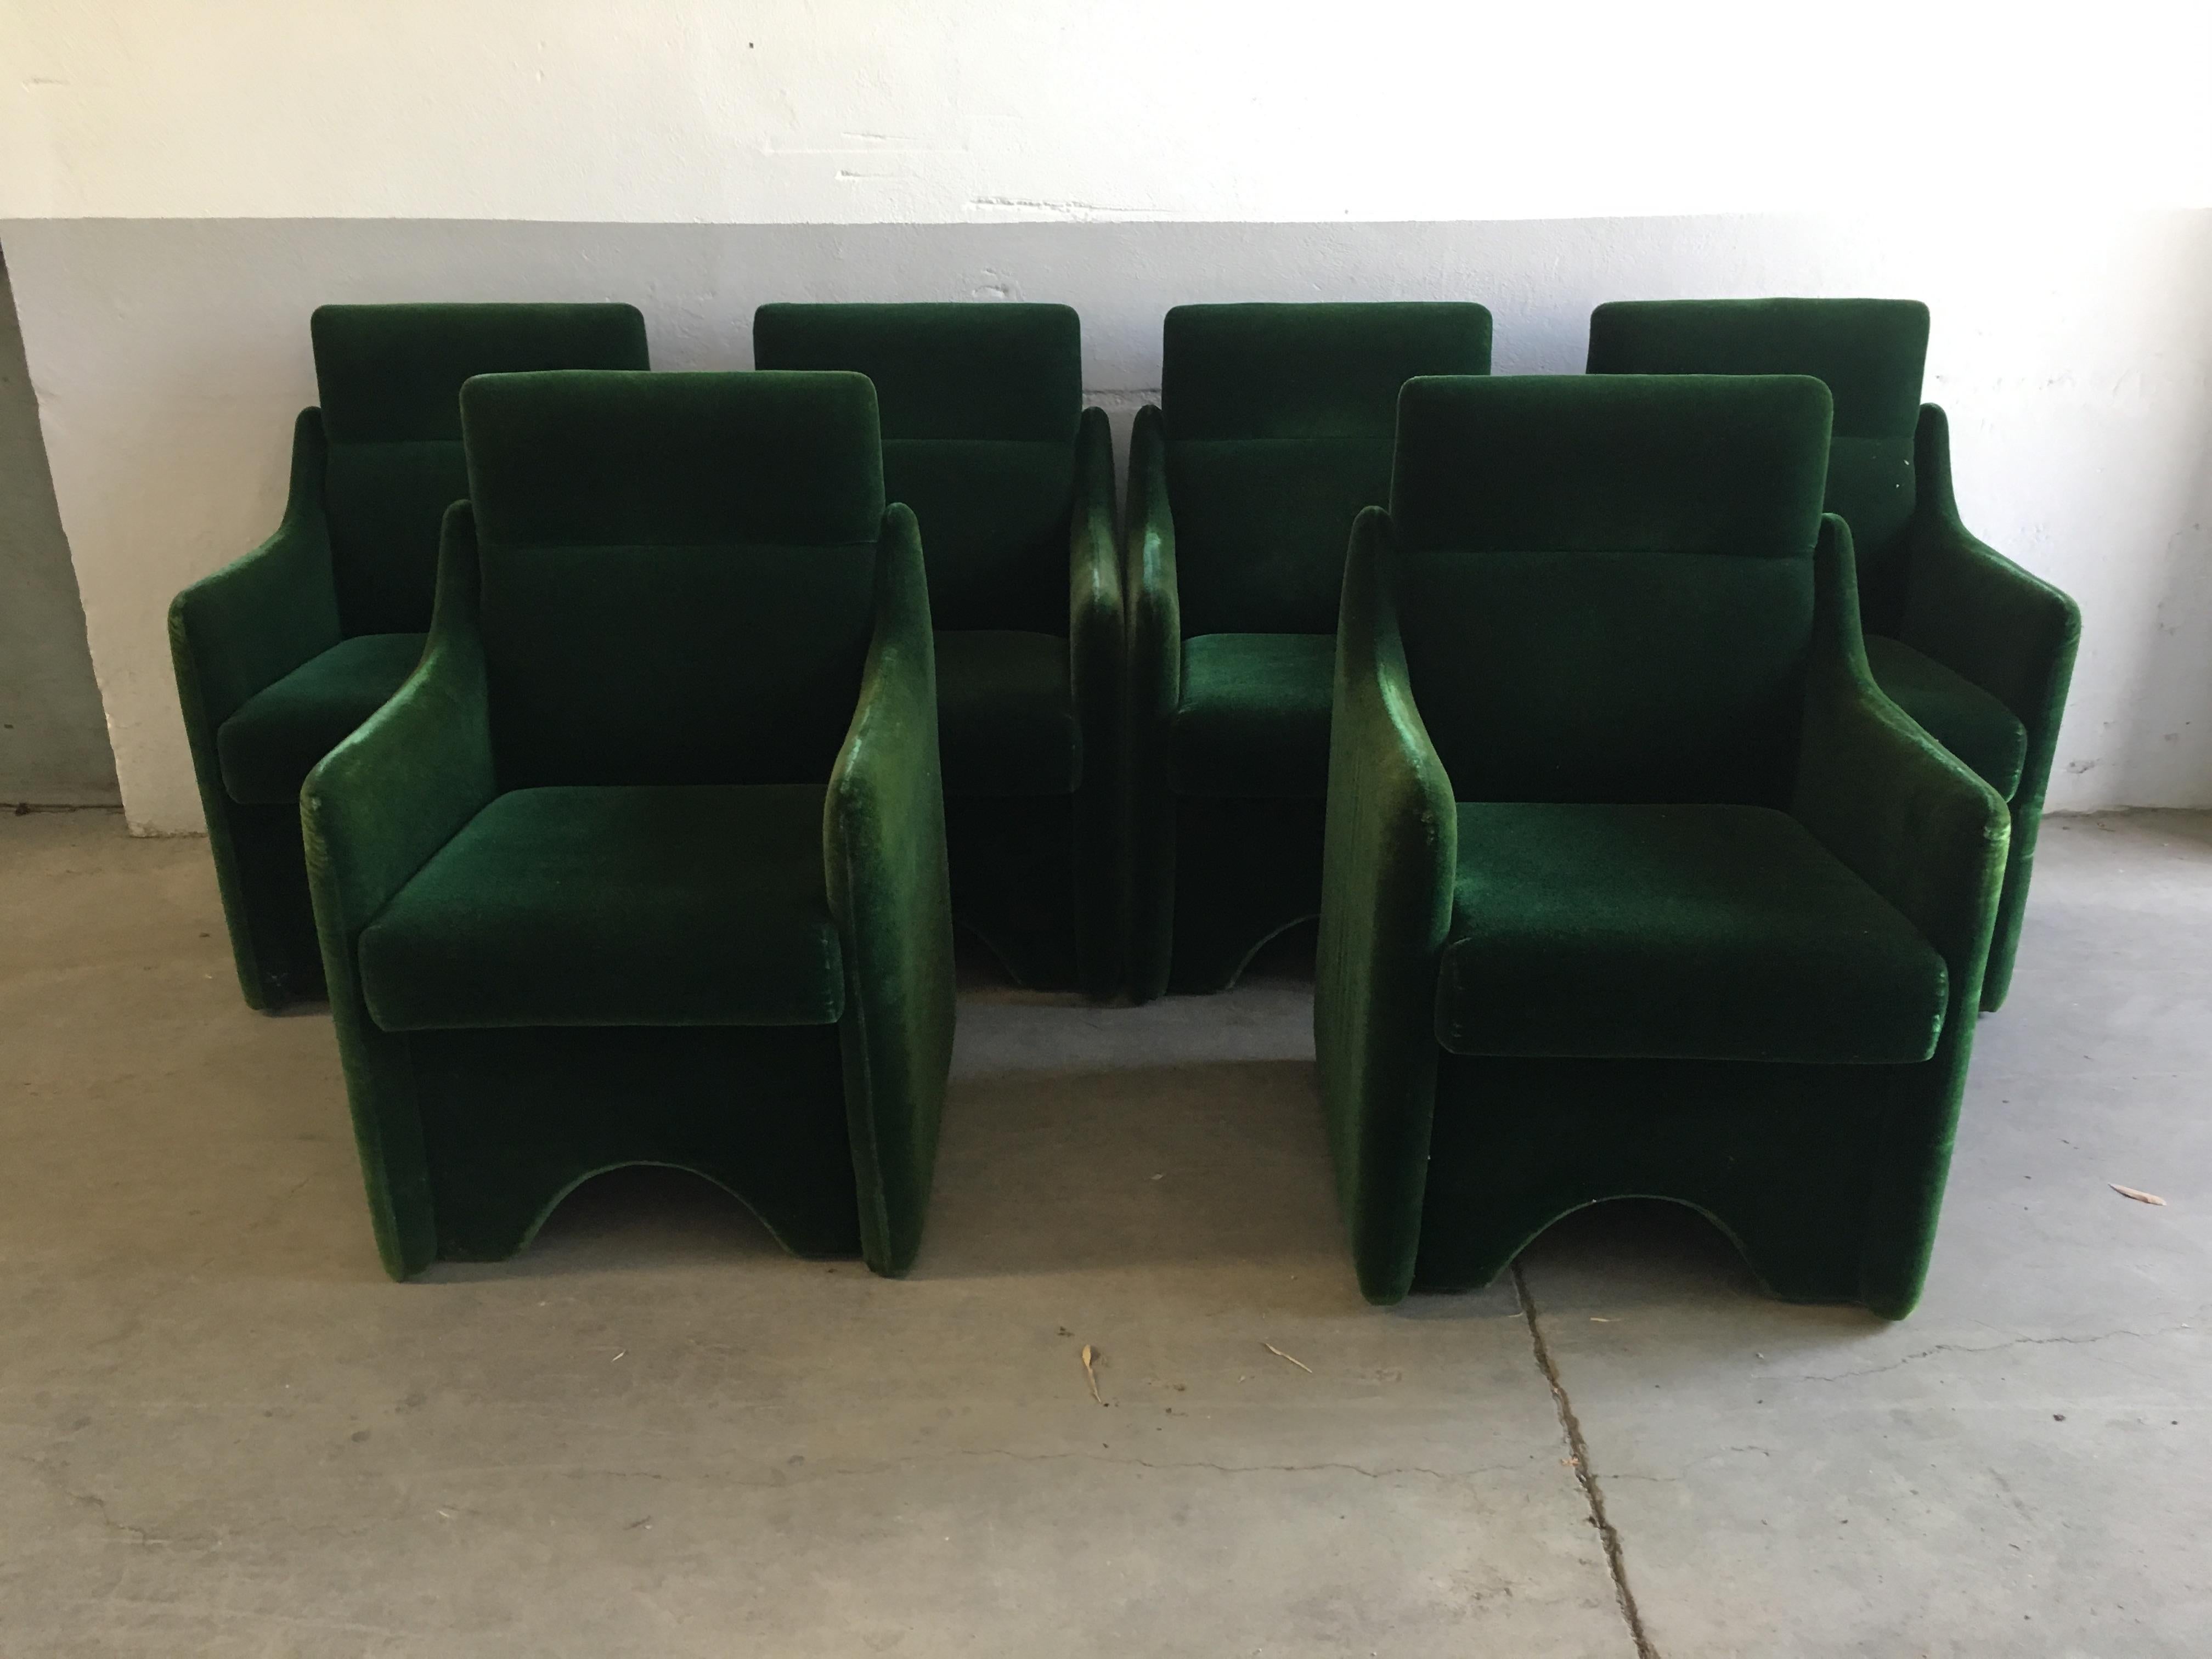 Mid-Century Modern Italian set of 6 armchairs by Luigi Caccia Dominioni for Azucena with their original polyester velvet fabric. 1970s
The upholstery is in good vintage conditions. Wear consistent with age and use.